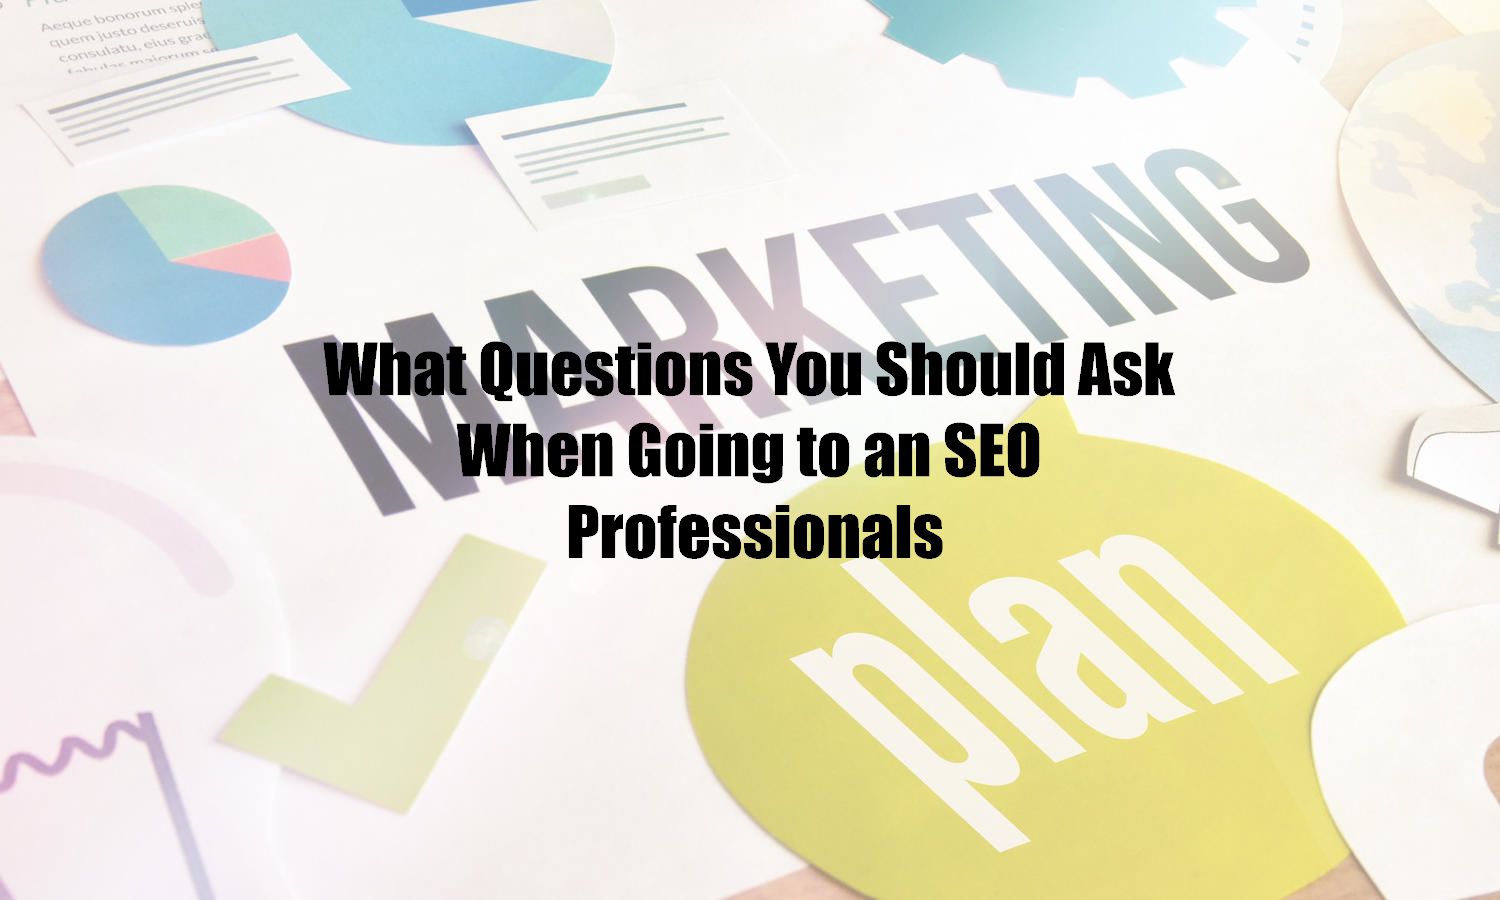 What Questions You Should Ask When Going to an SEO Professionals